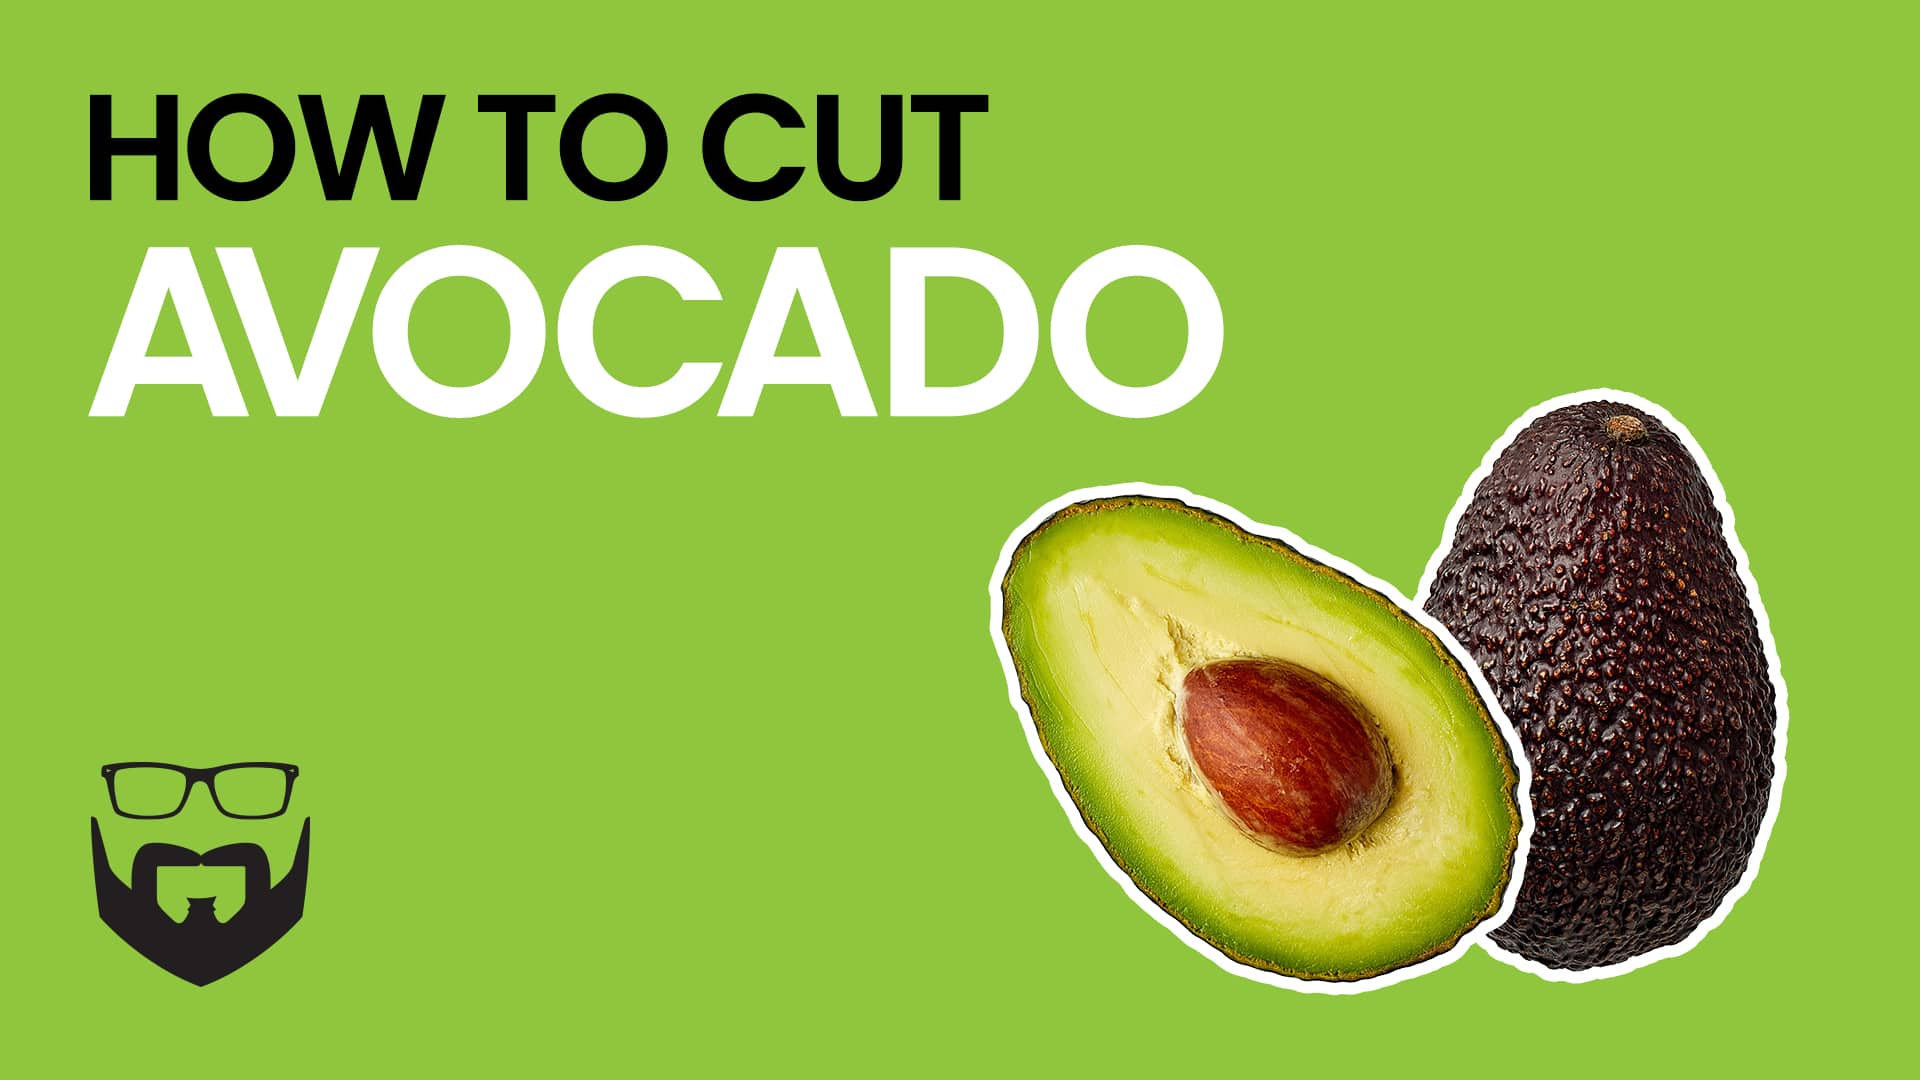 How to Cut Avocado Video - Green